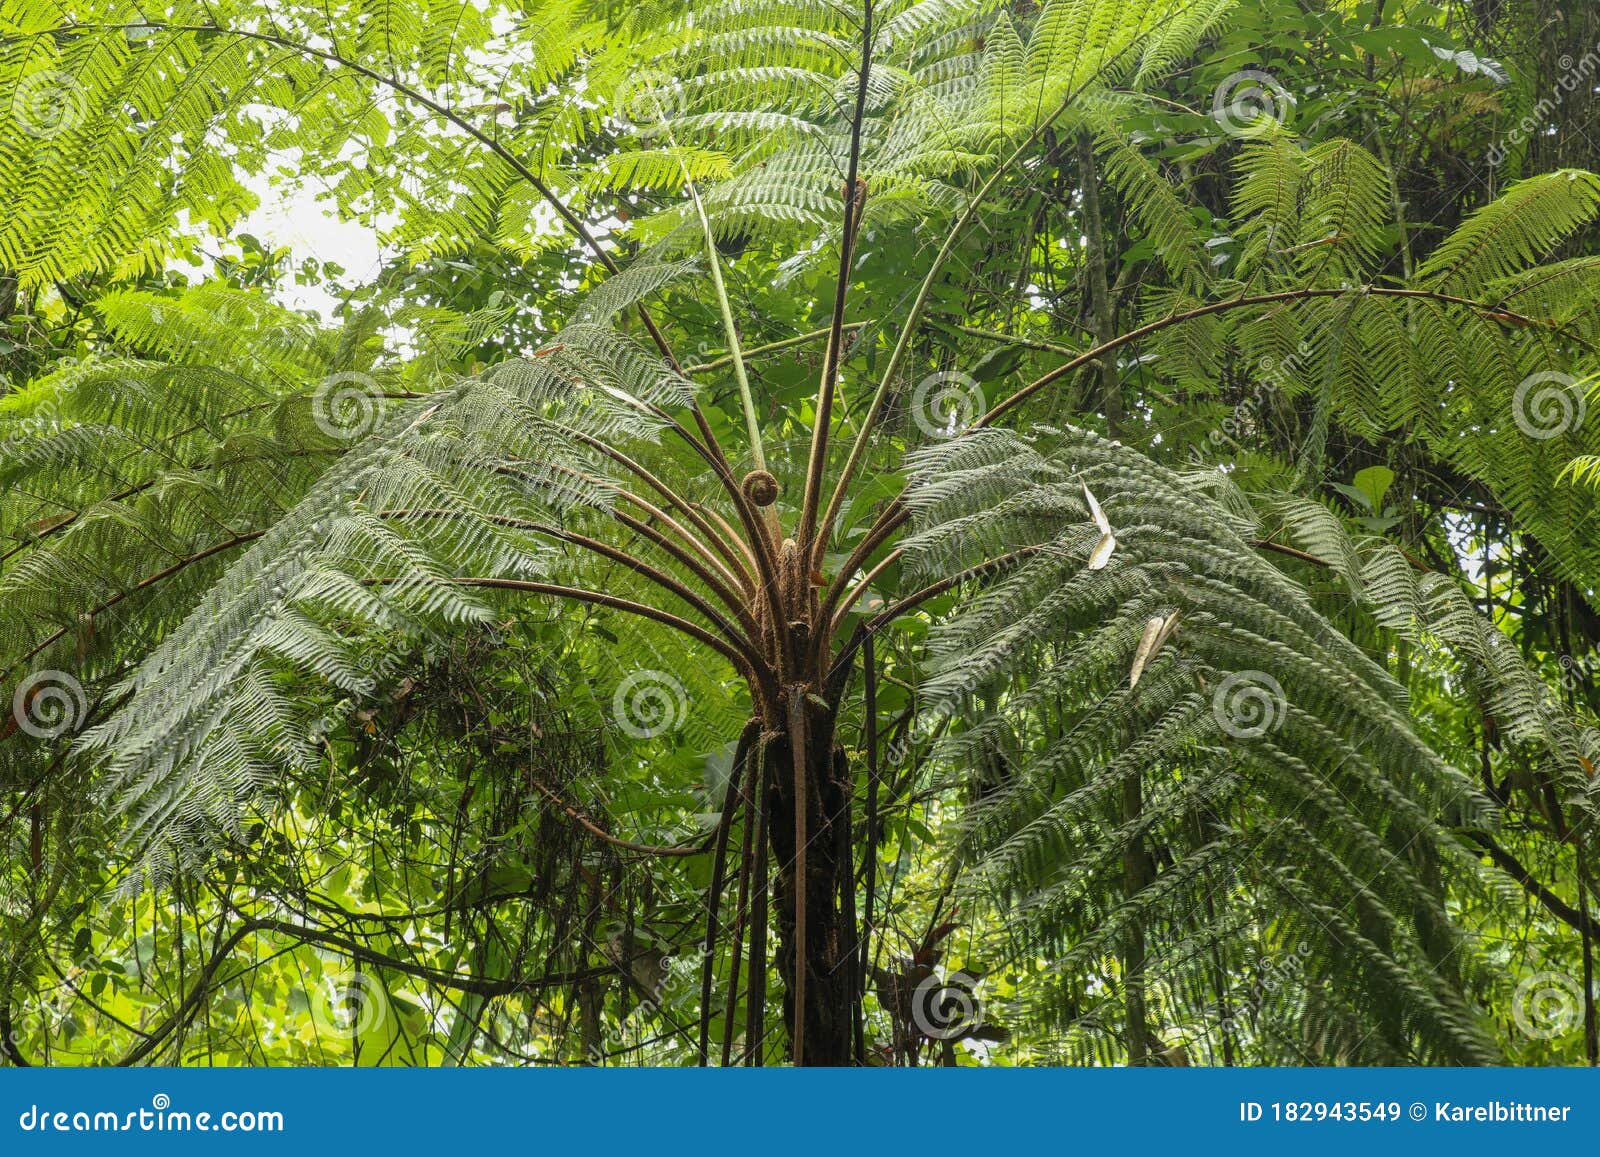 crown of tropical tree cyathea arborea. close up of branches of